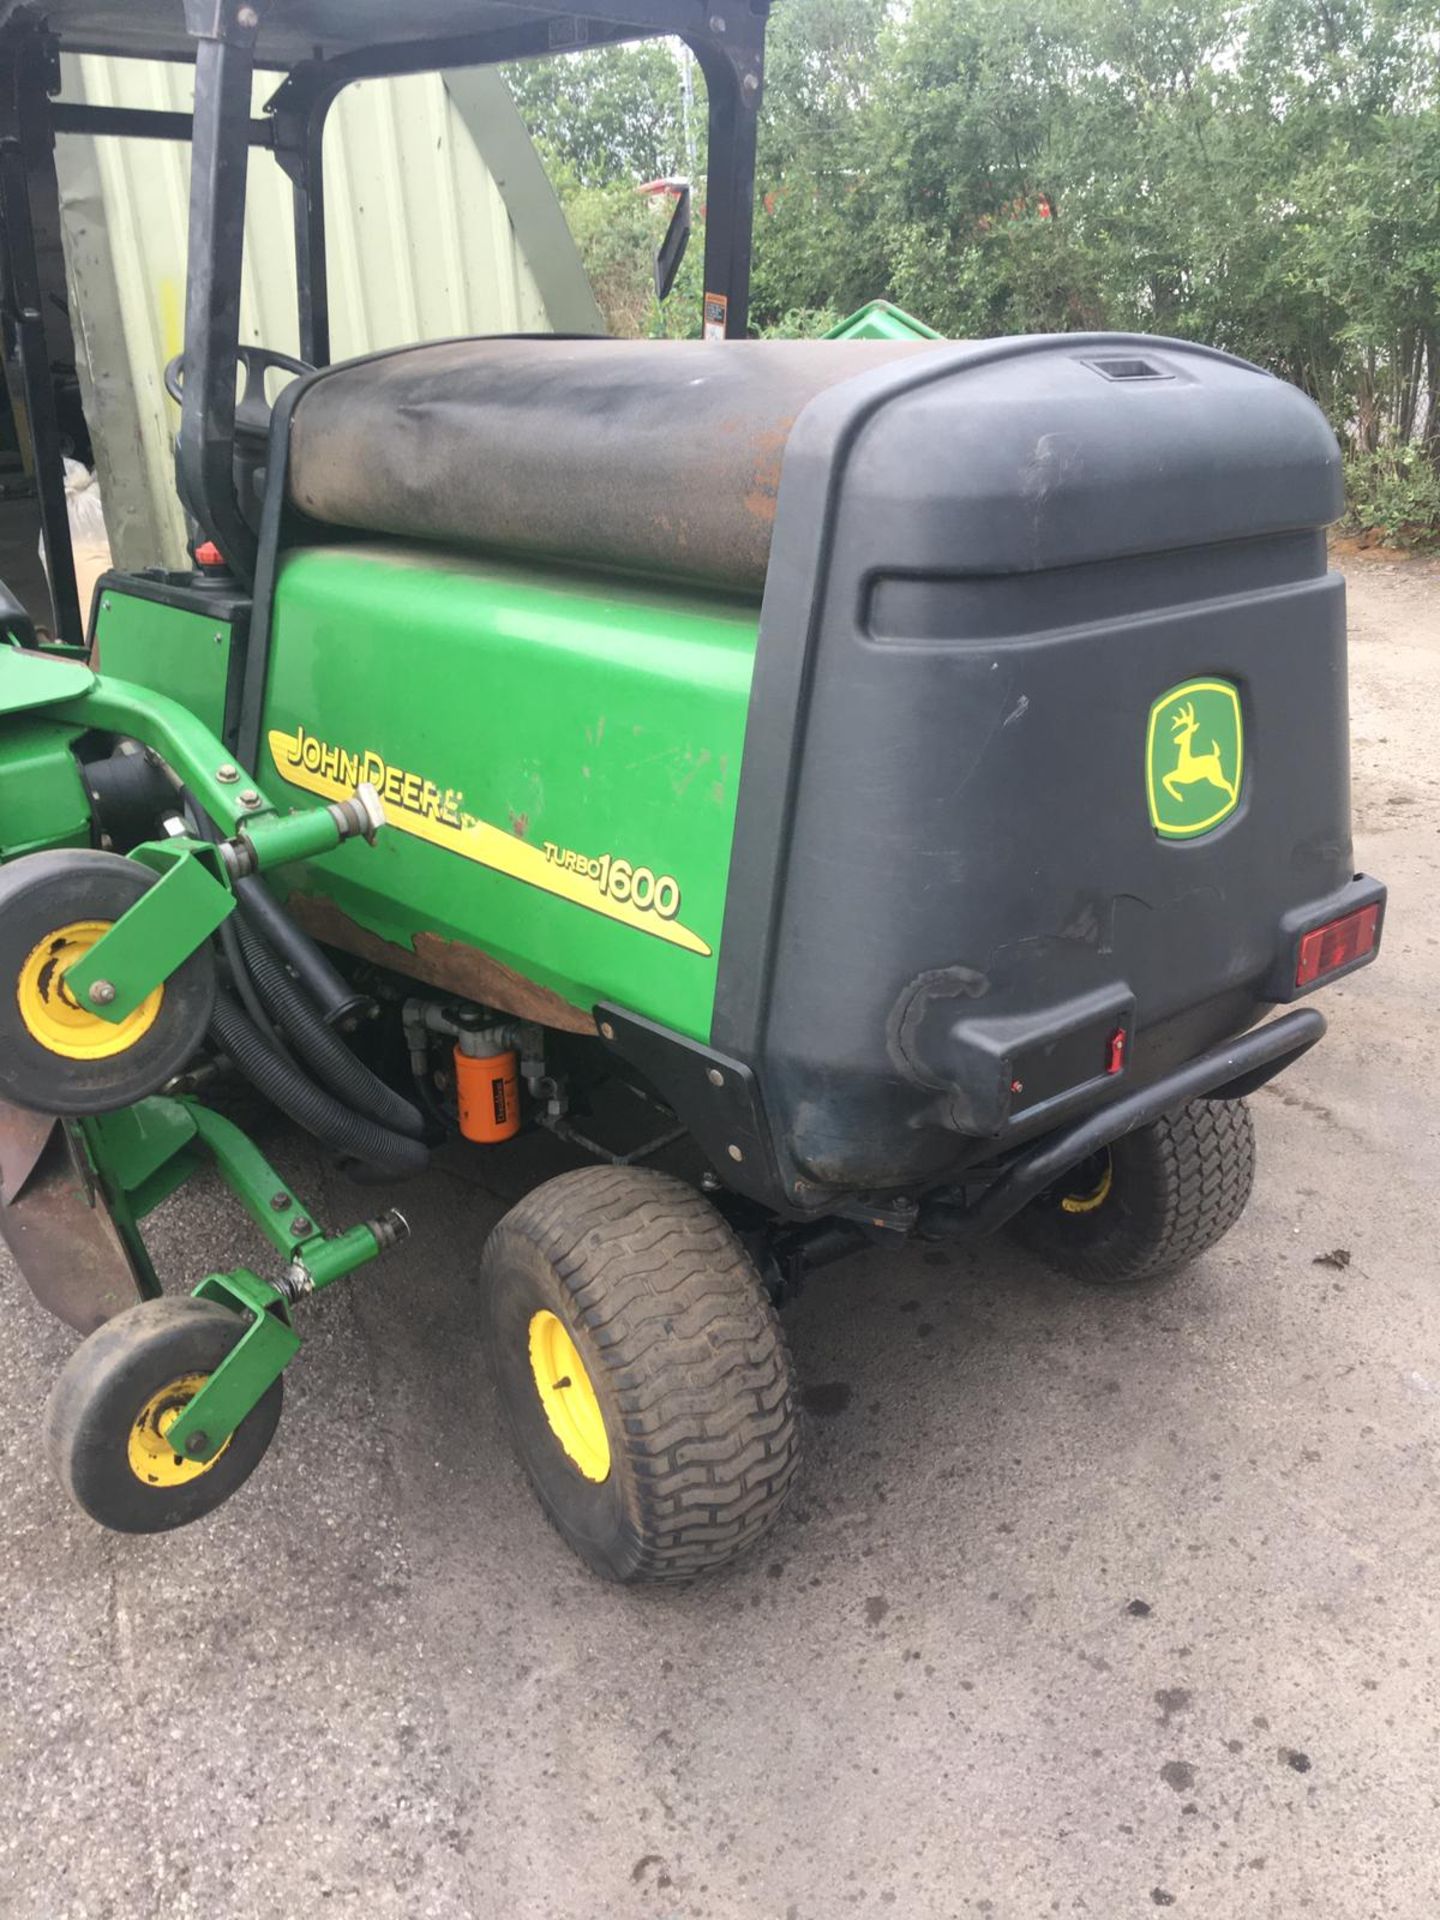 JOHN DEERE 1600 WIDE AREA TURBO BATWING RIDE ON LAWN MOWER, CRUISE CONTROL, RUNS & WORKS *NO VAT* - Image 4 of 24